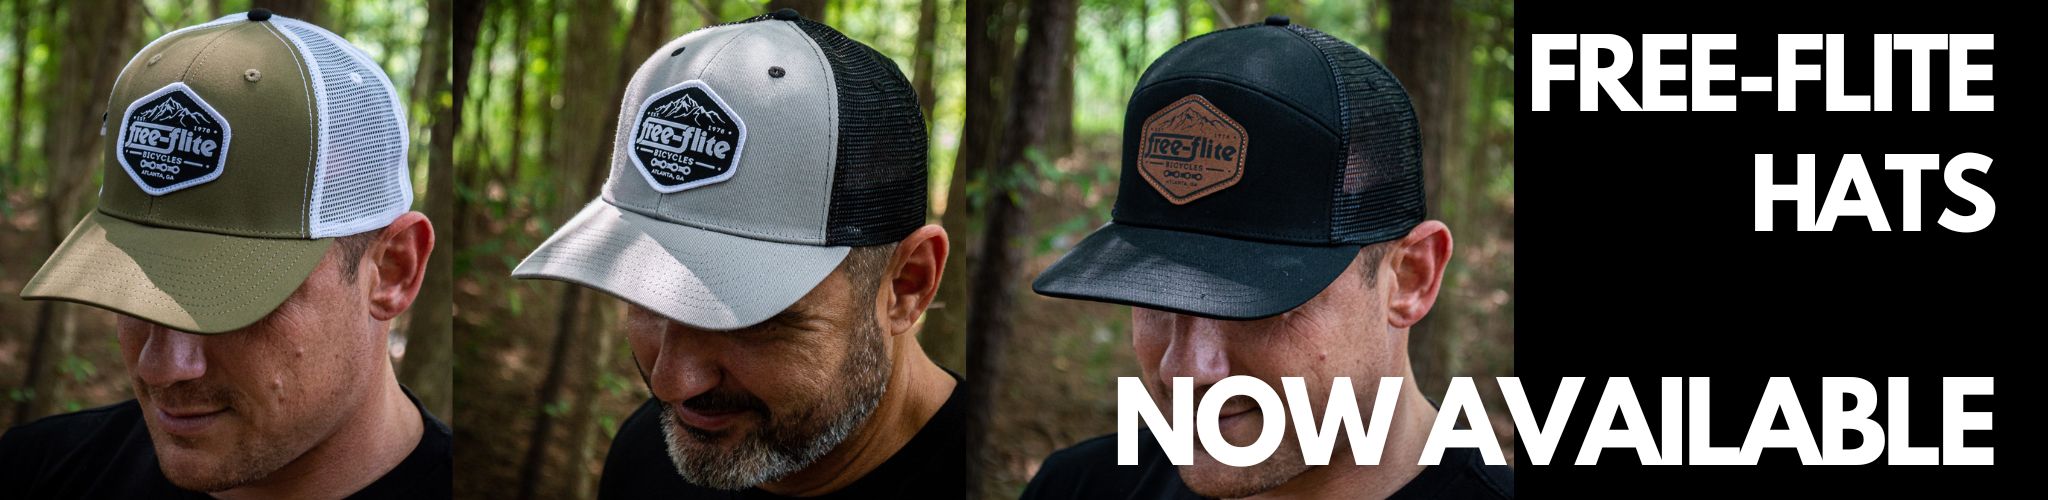 Free-Flite Hats Now Available